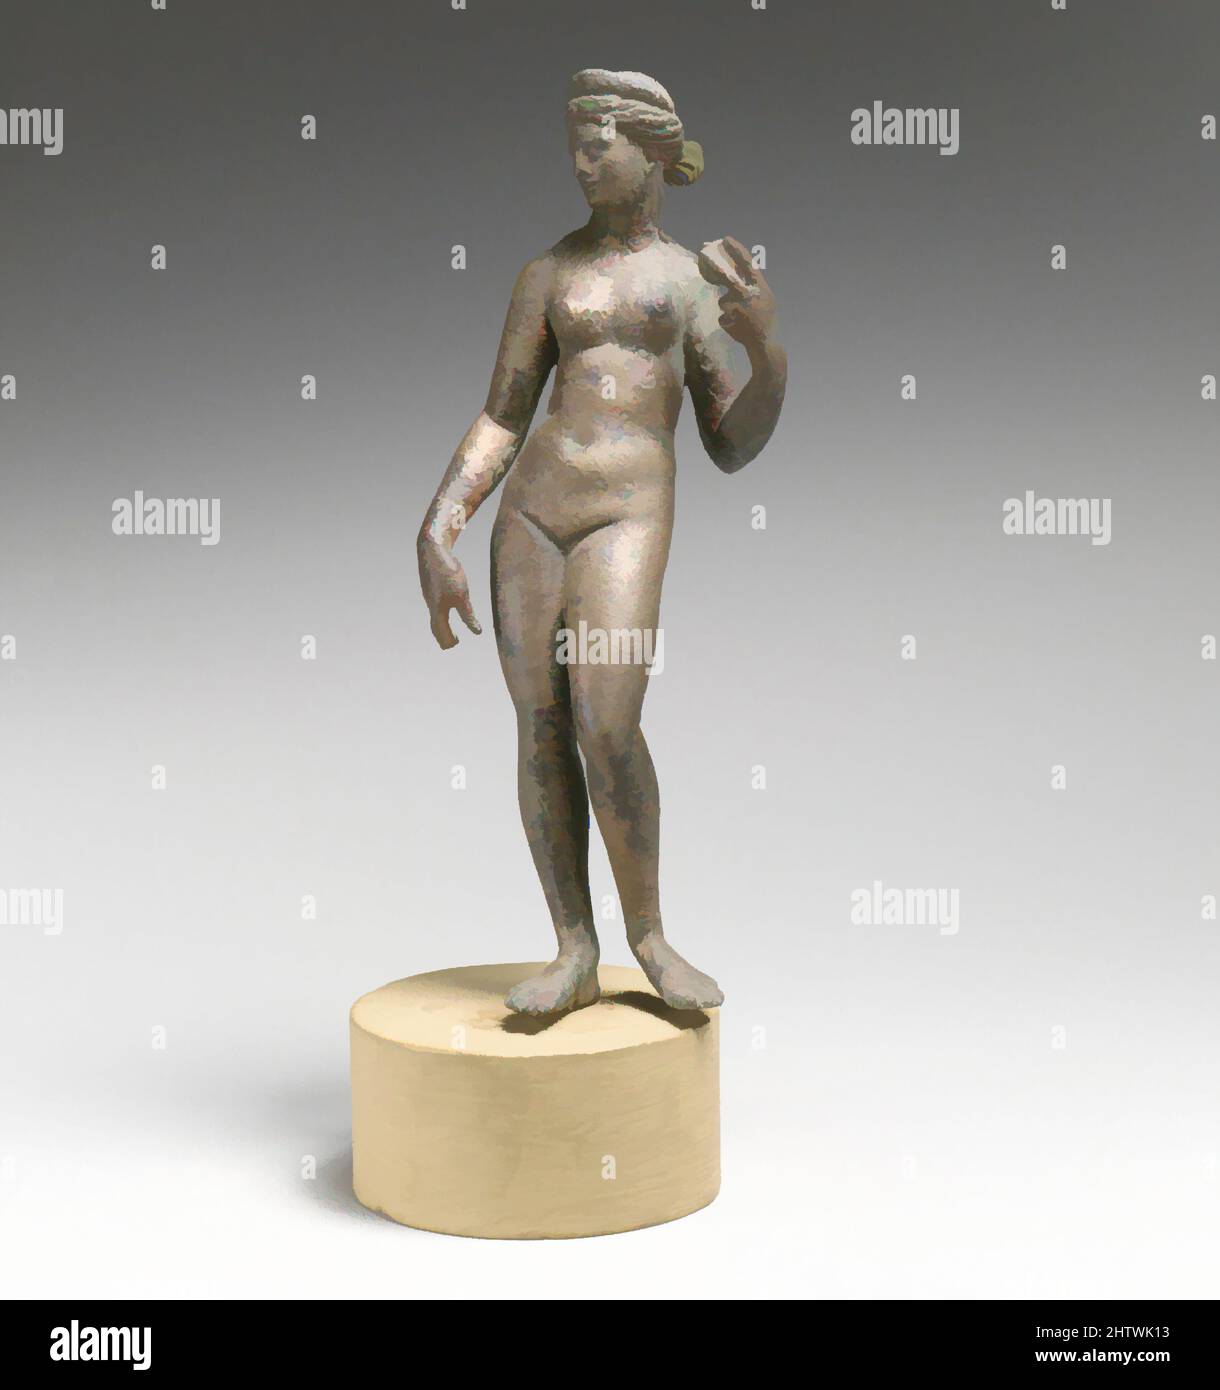 Art inspired by Statuette of Aphrodite with apple, Bronze, H.: 6 3/8 in. (16.2 cm), Bronzes, Classic works modernized by Artotop with a splash of modernity. Shapes, color and value, eye-catching visual impact on art. Emotions through freedom of artworks in a contemporary way. A timeless message pursuing a wildly creative new direction. Artists turning to the digital medium and creating the Artotop NFT Stock Photo